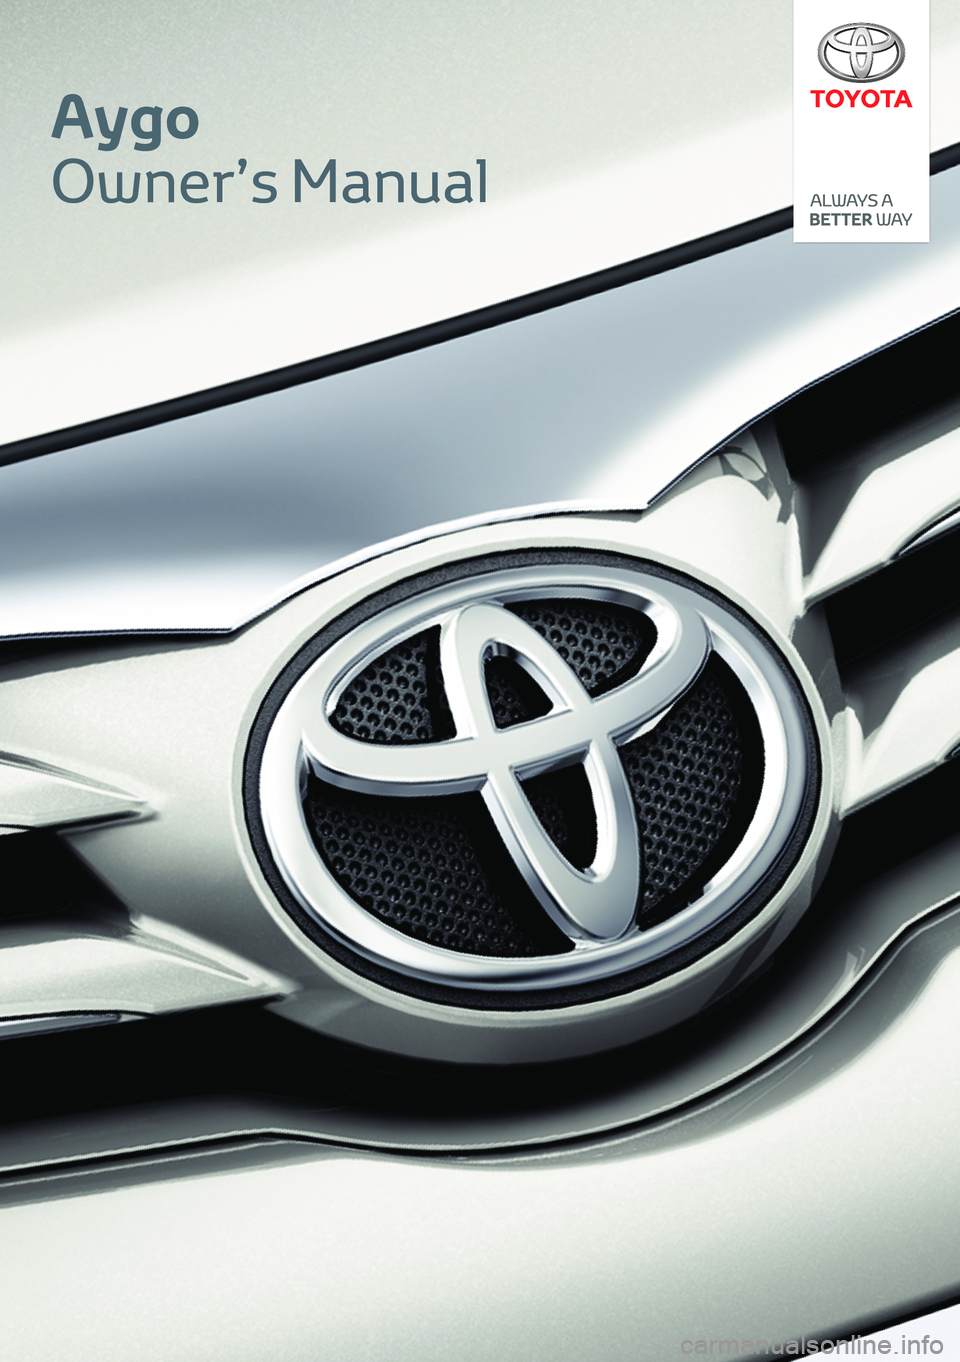 TOYOTA AYGO 2021  Manuel du propriétaire (in French) Aygo
Owner’s Manual 